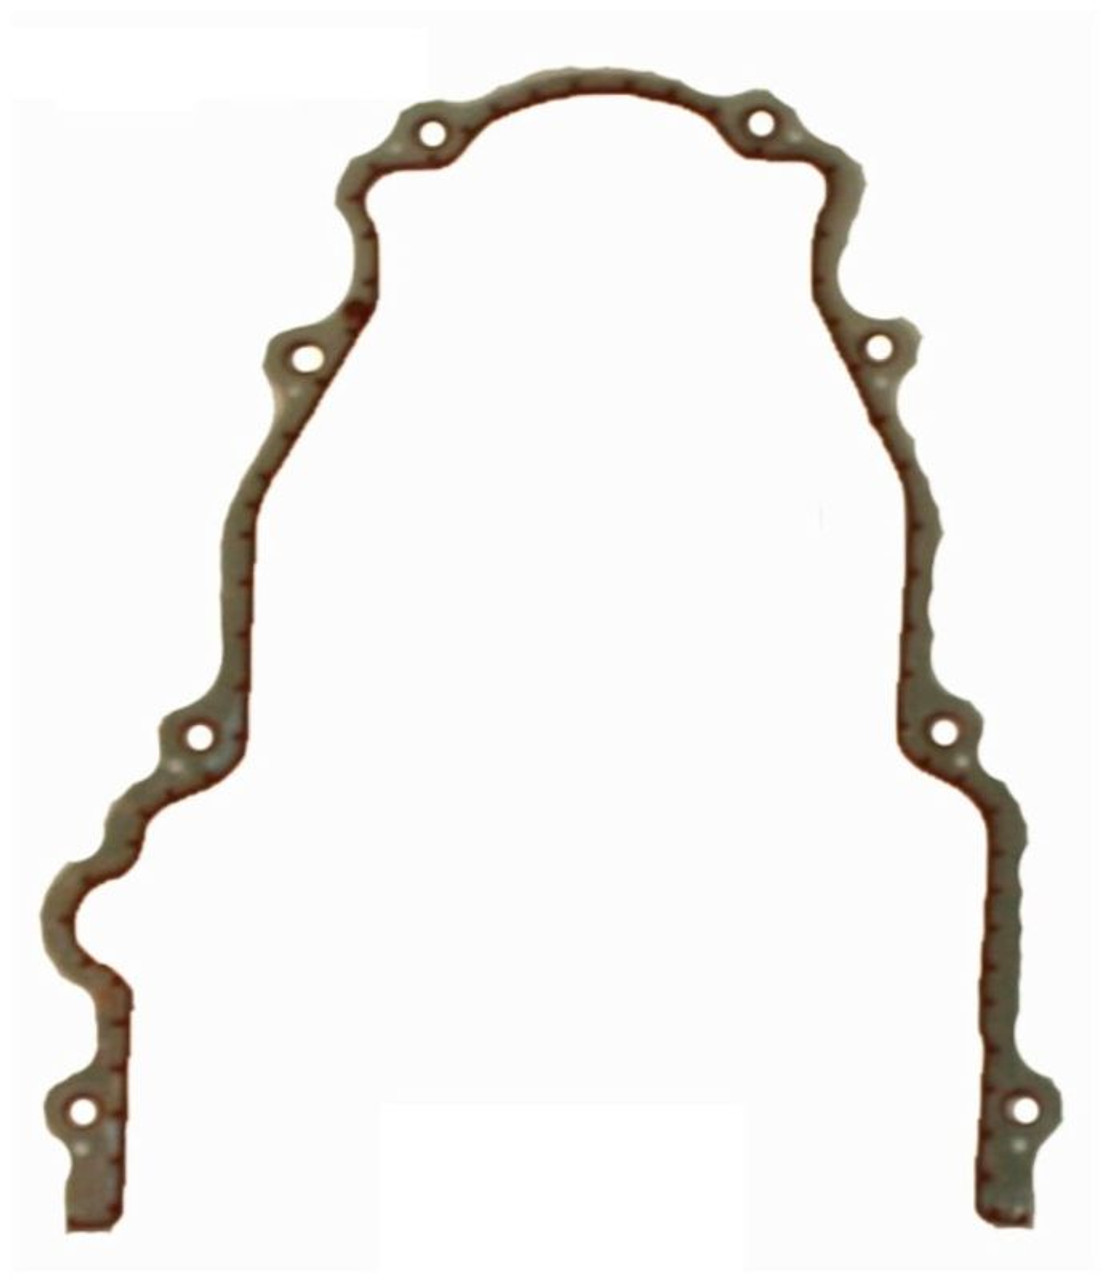 2002 Chevrolet Suburban 1500 5.3L Engine Timing Cover Gasket TCG293-A -83